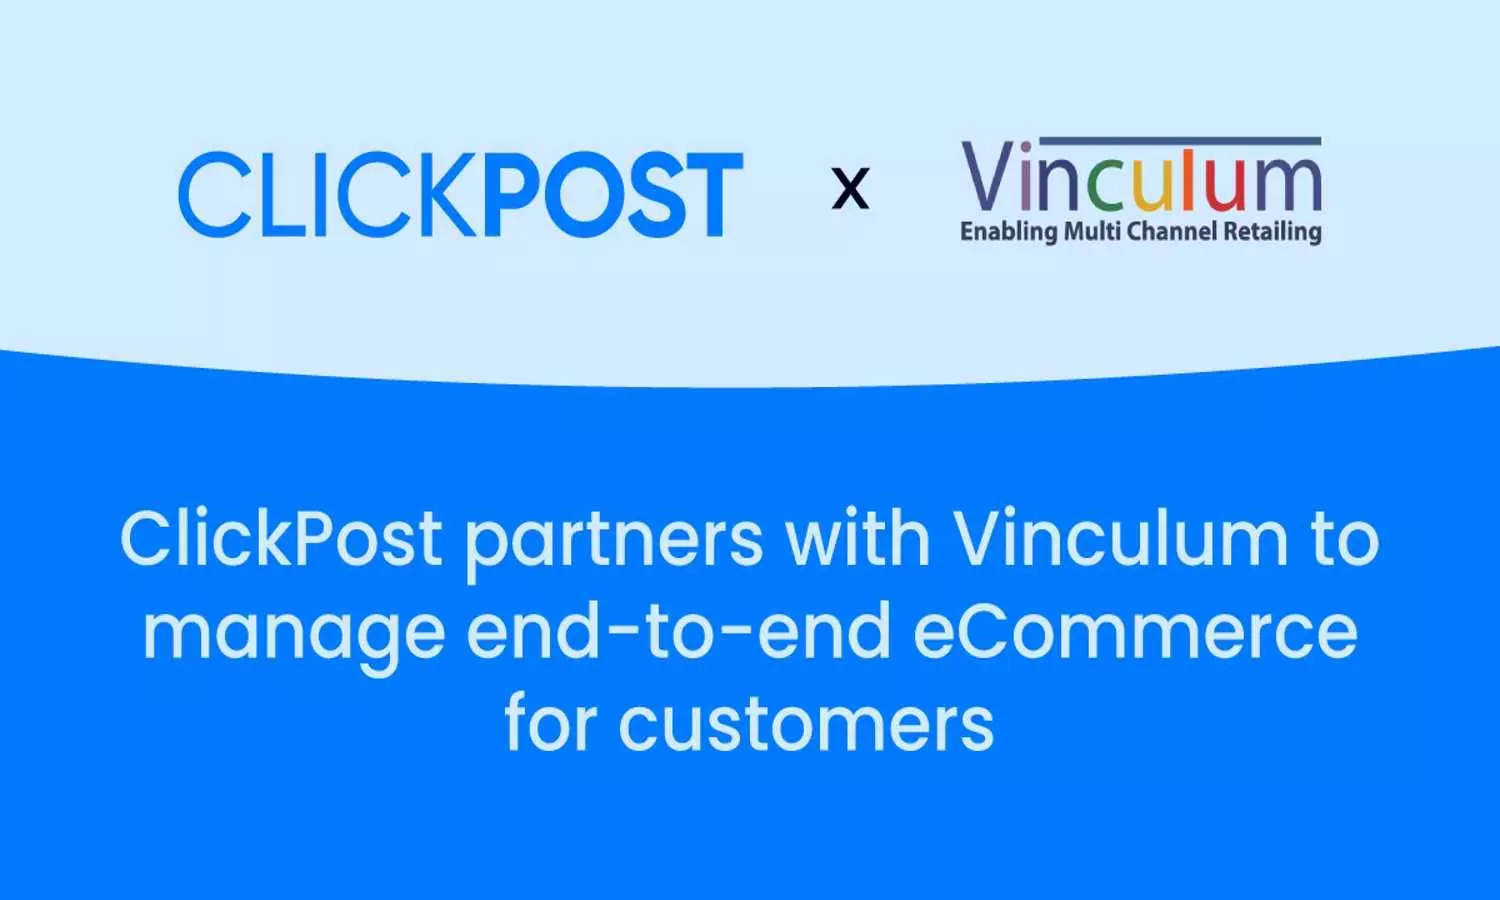 ClickPost, Vinculum partner for end-to-end eCommerce